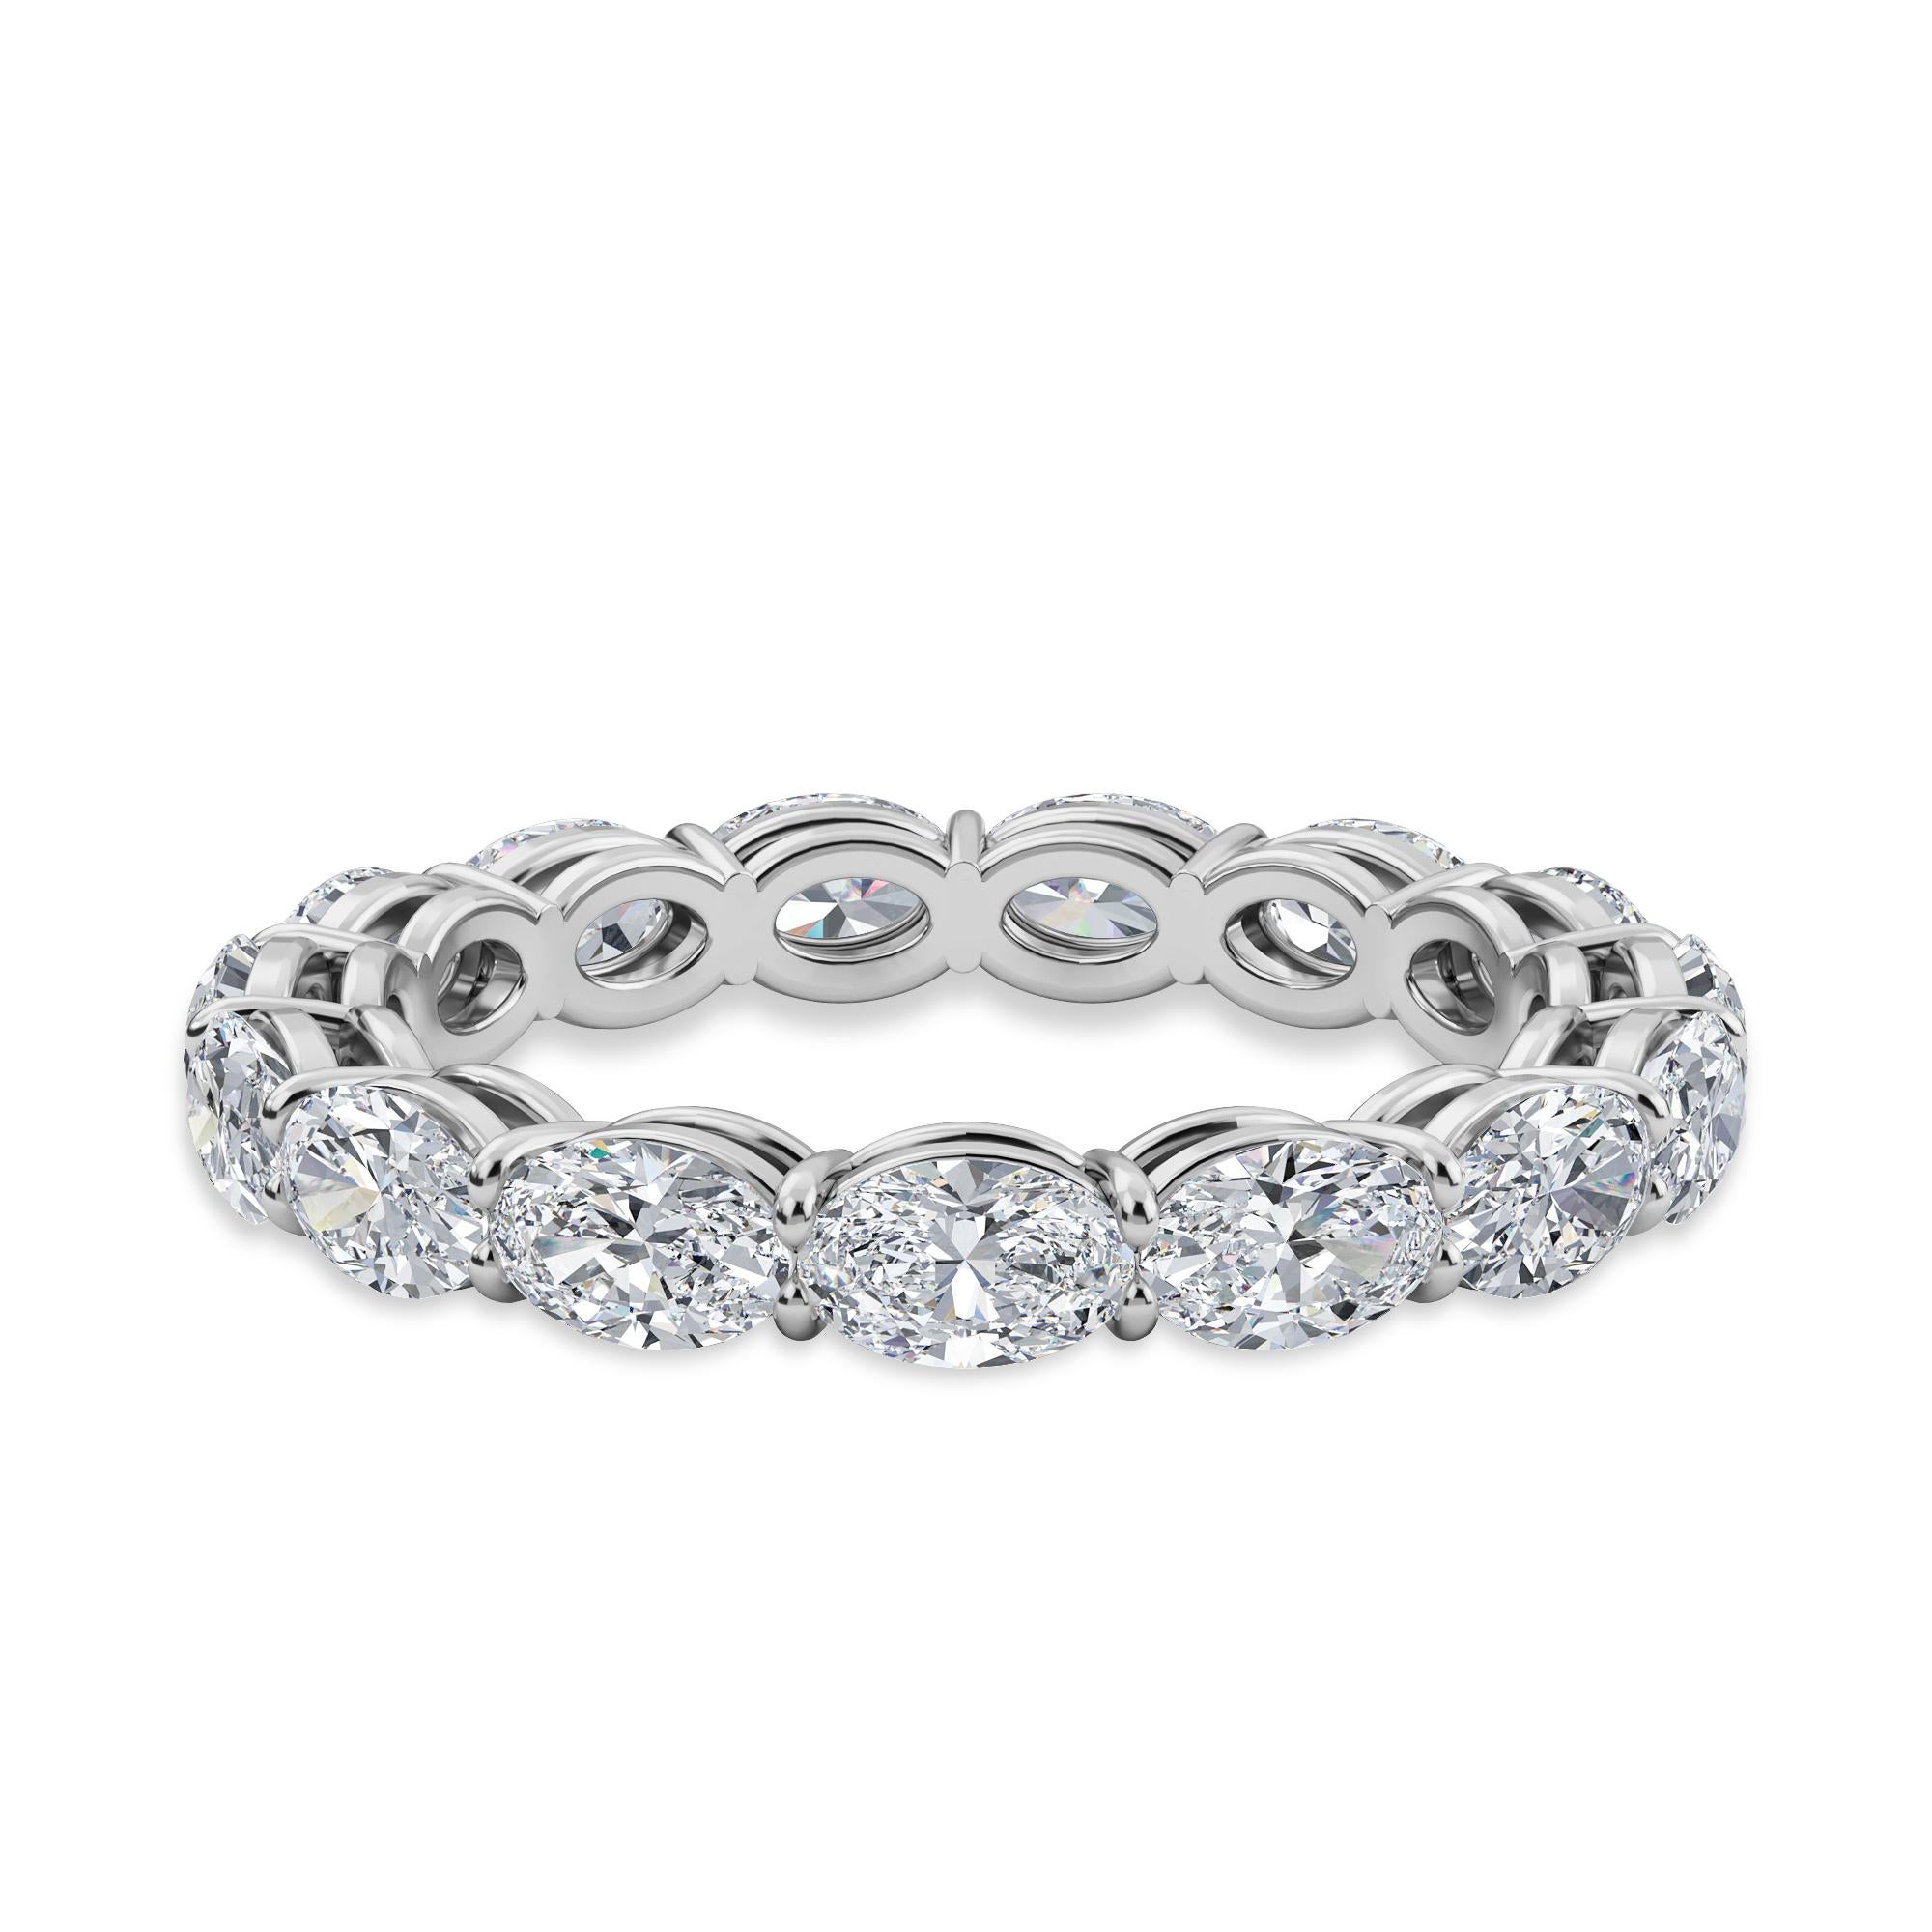 This Oval Horizontal Eternity Band features 15 Oval Diamonds, with a Total Carat Weight of 2.90. The stones are F Color, VS-SI Clarity, and set in a Platinum Comfort Fit Setting. 